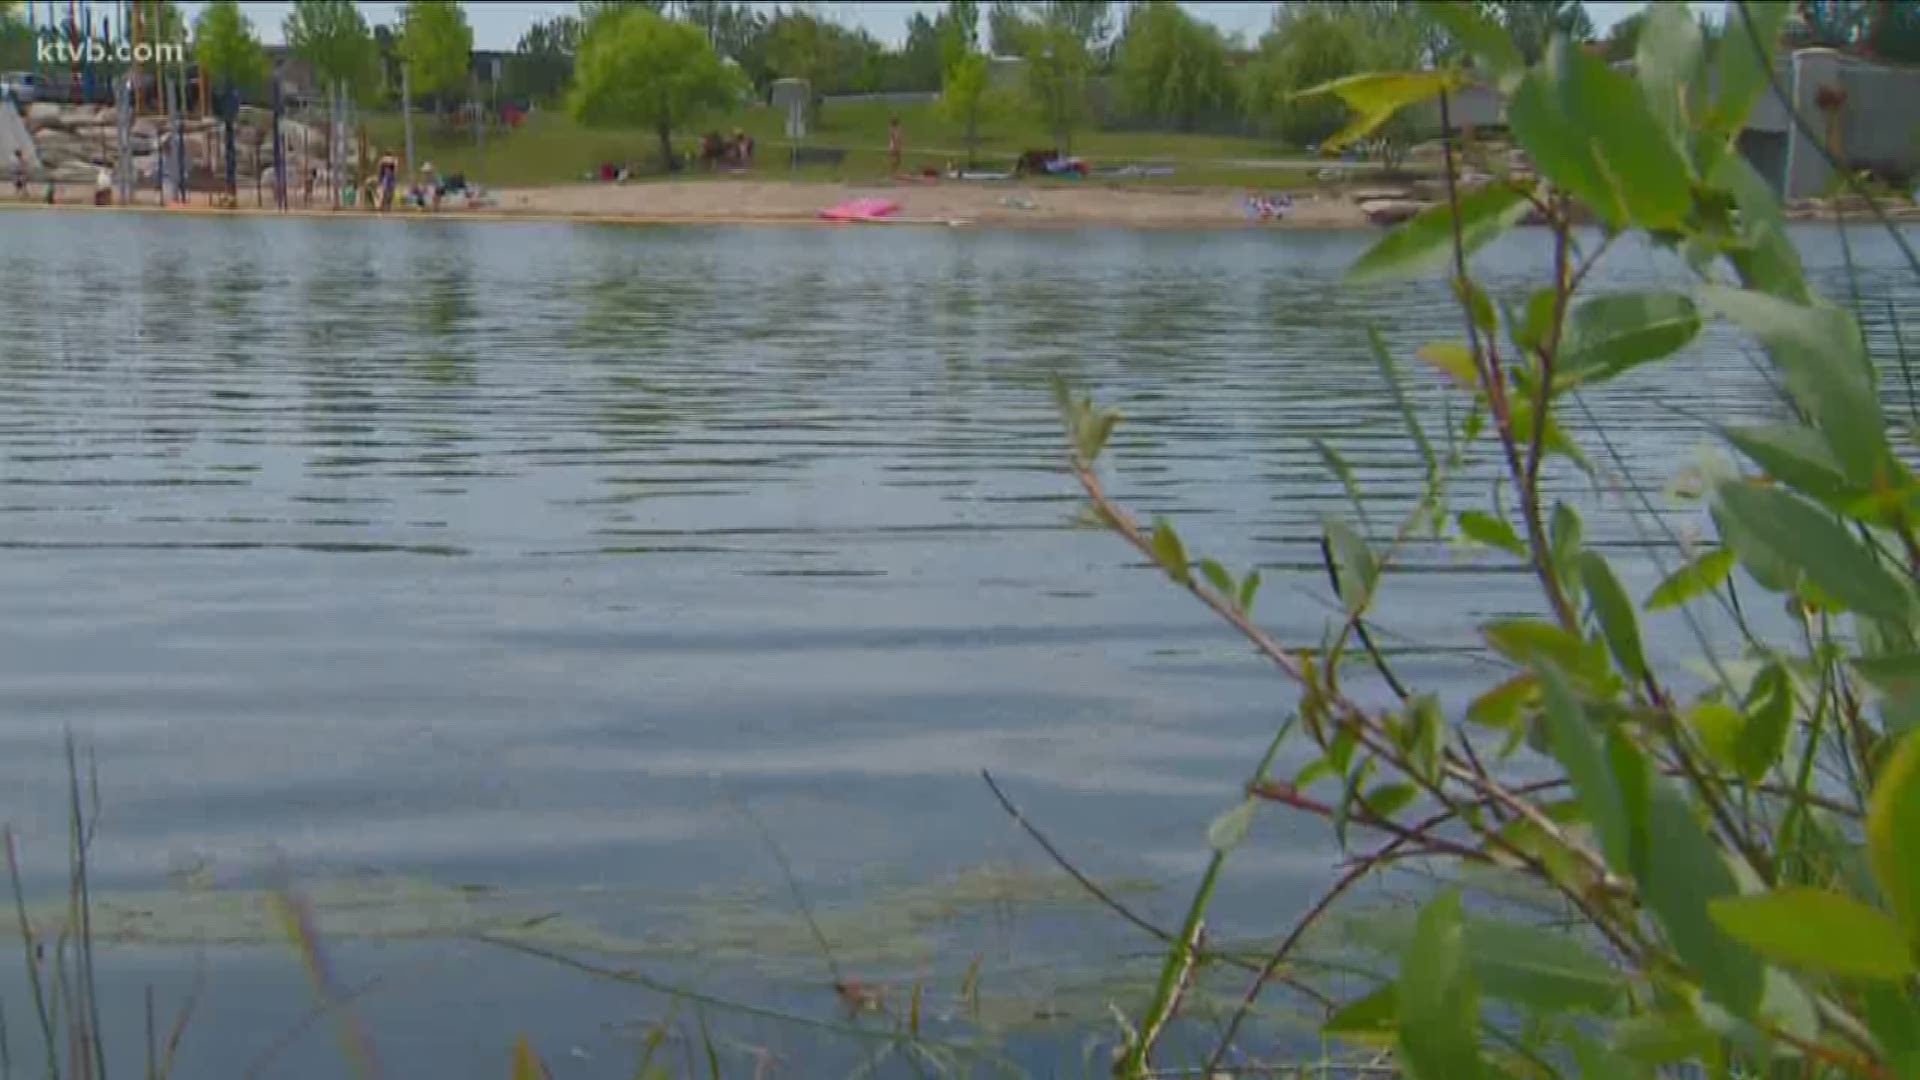 The City of Boise is working on several new projects to improve water flow and water quality in some of the most popular swimming ponds.